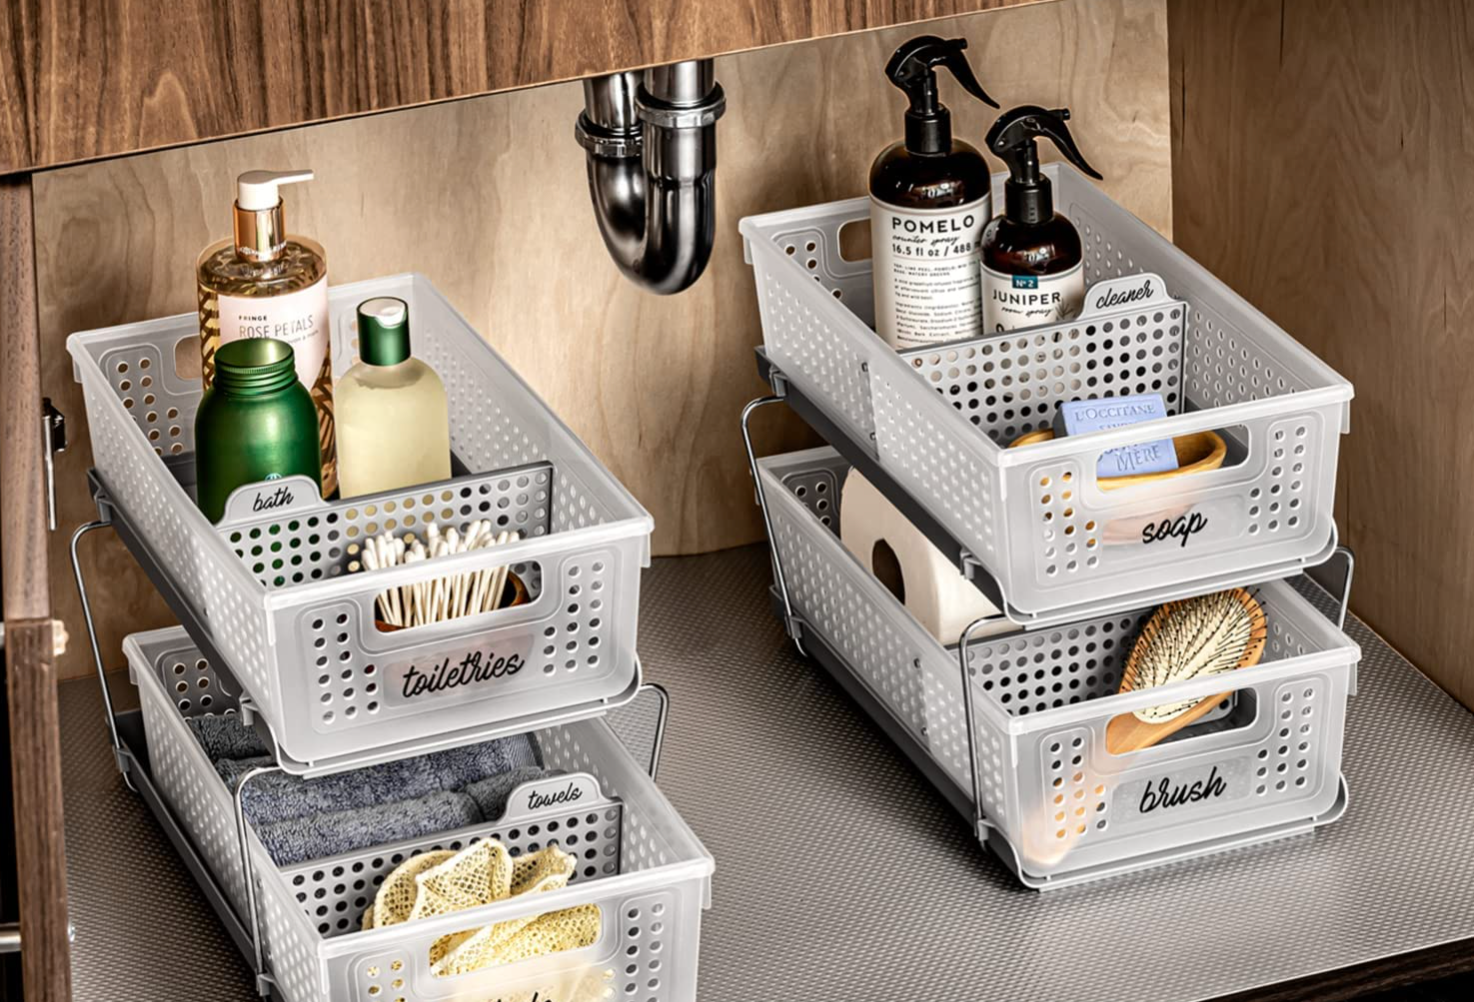 The 11 Best Bathroom Organization Ideas, Page 2 of 3, The Eleven Best